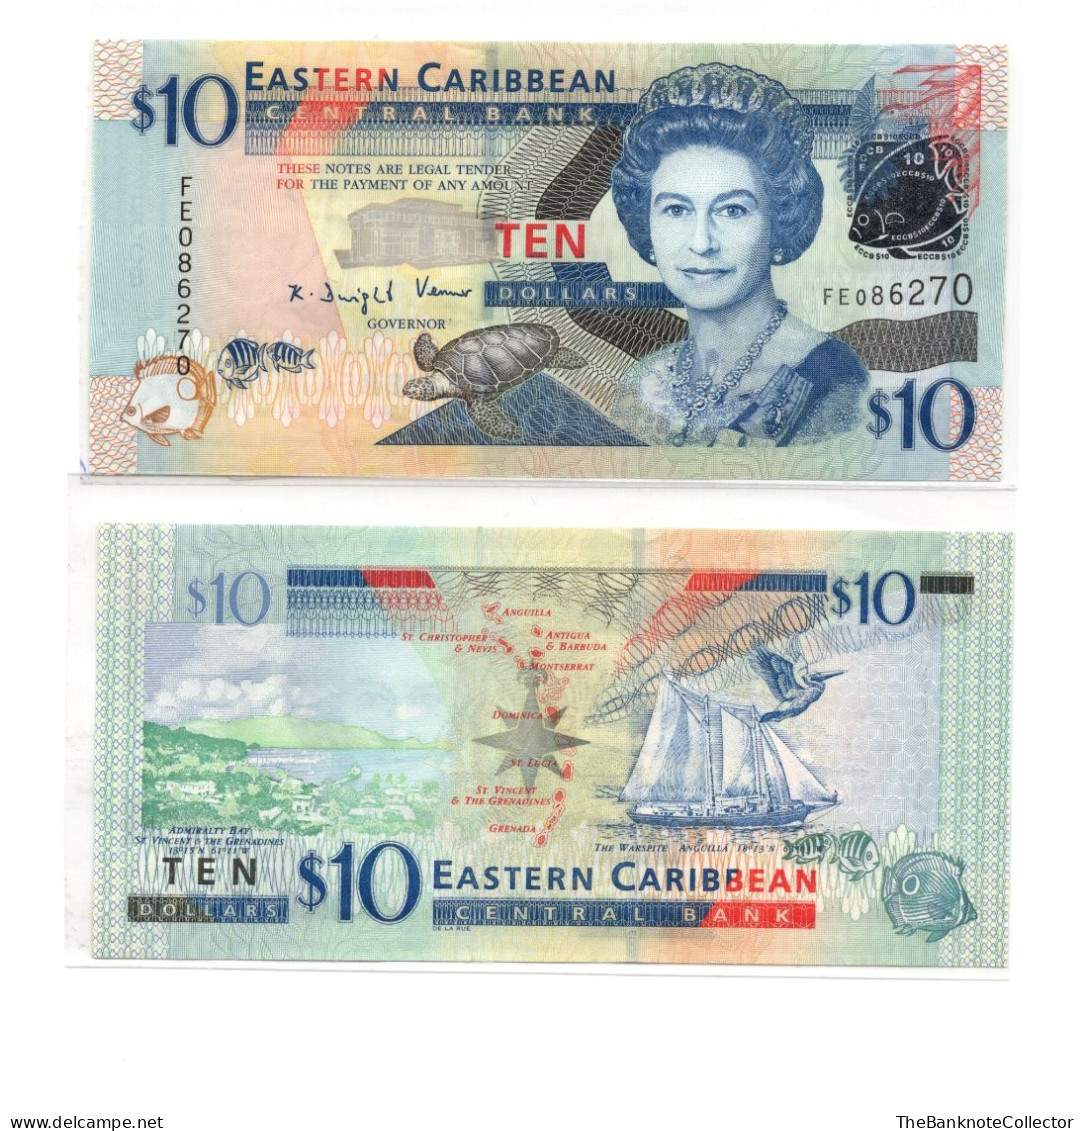 Eastern Caribbean Central Bank 10 Dollars ND 2008 QEII P-48 UNC - East Carribeans